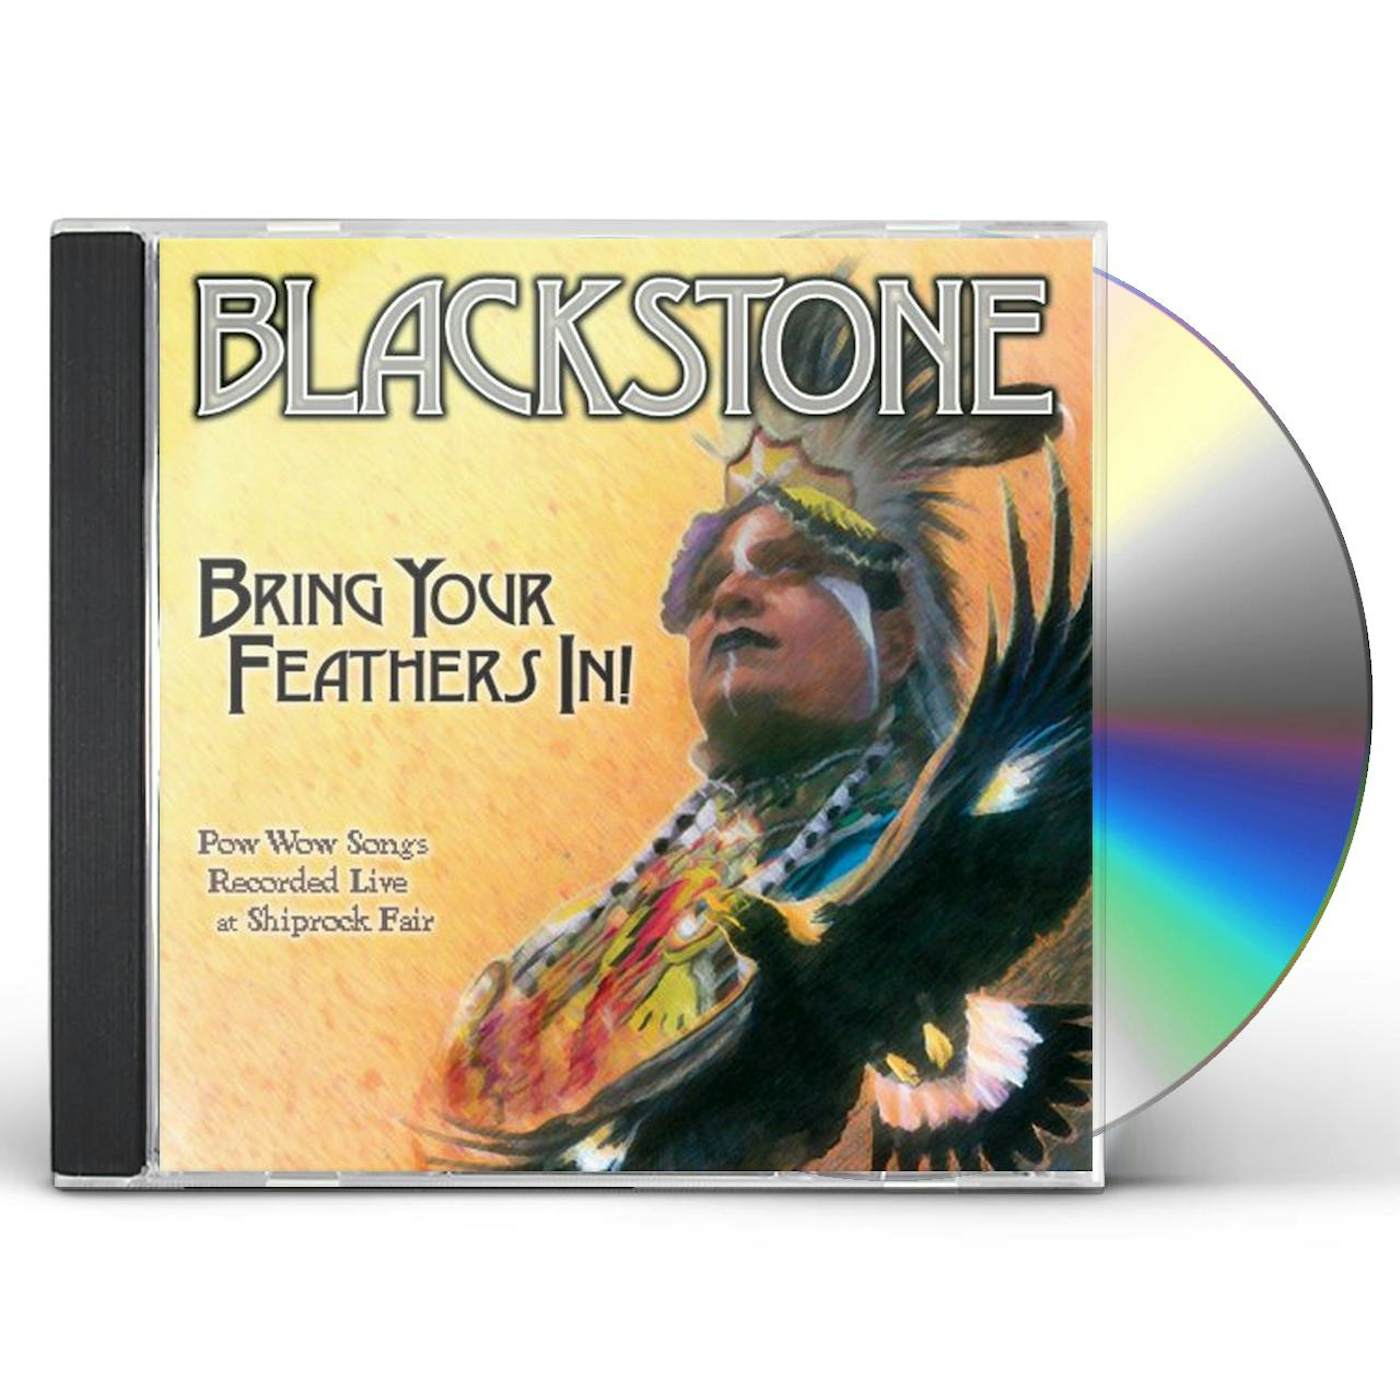 Blackstone BRING YOUR FEATHERS IN CD